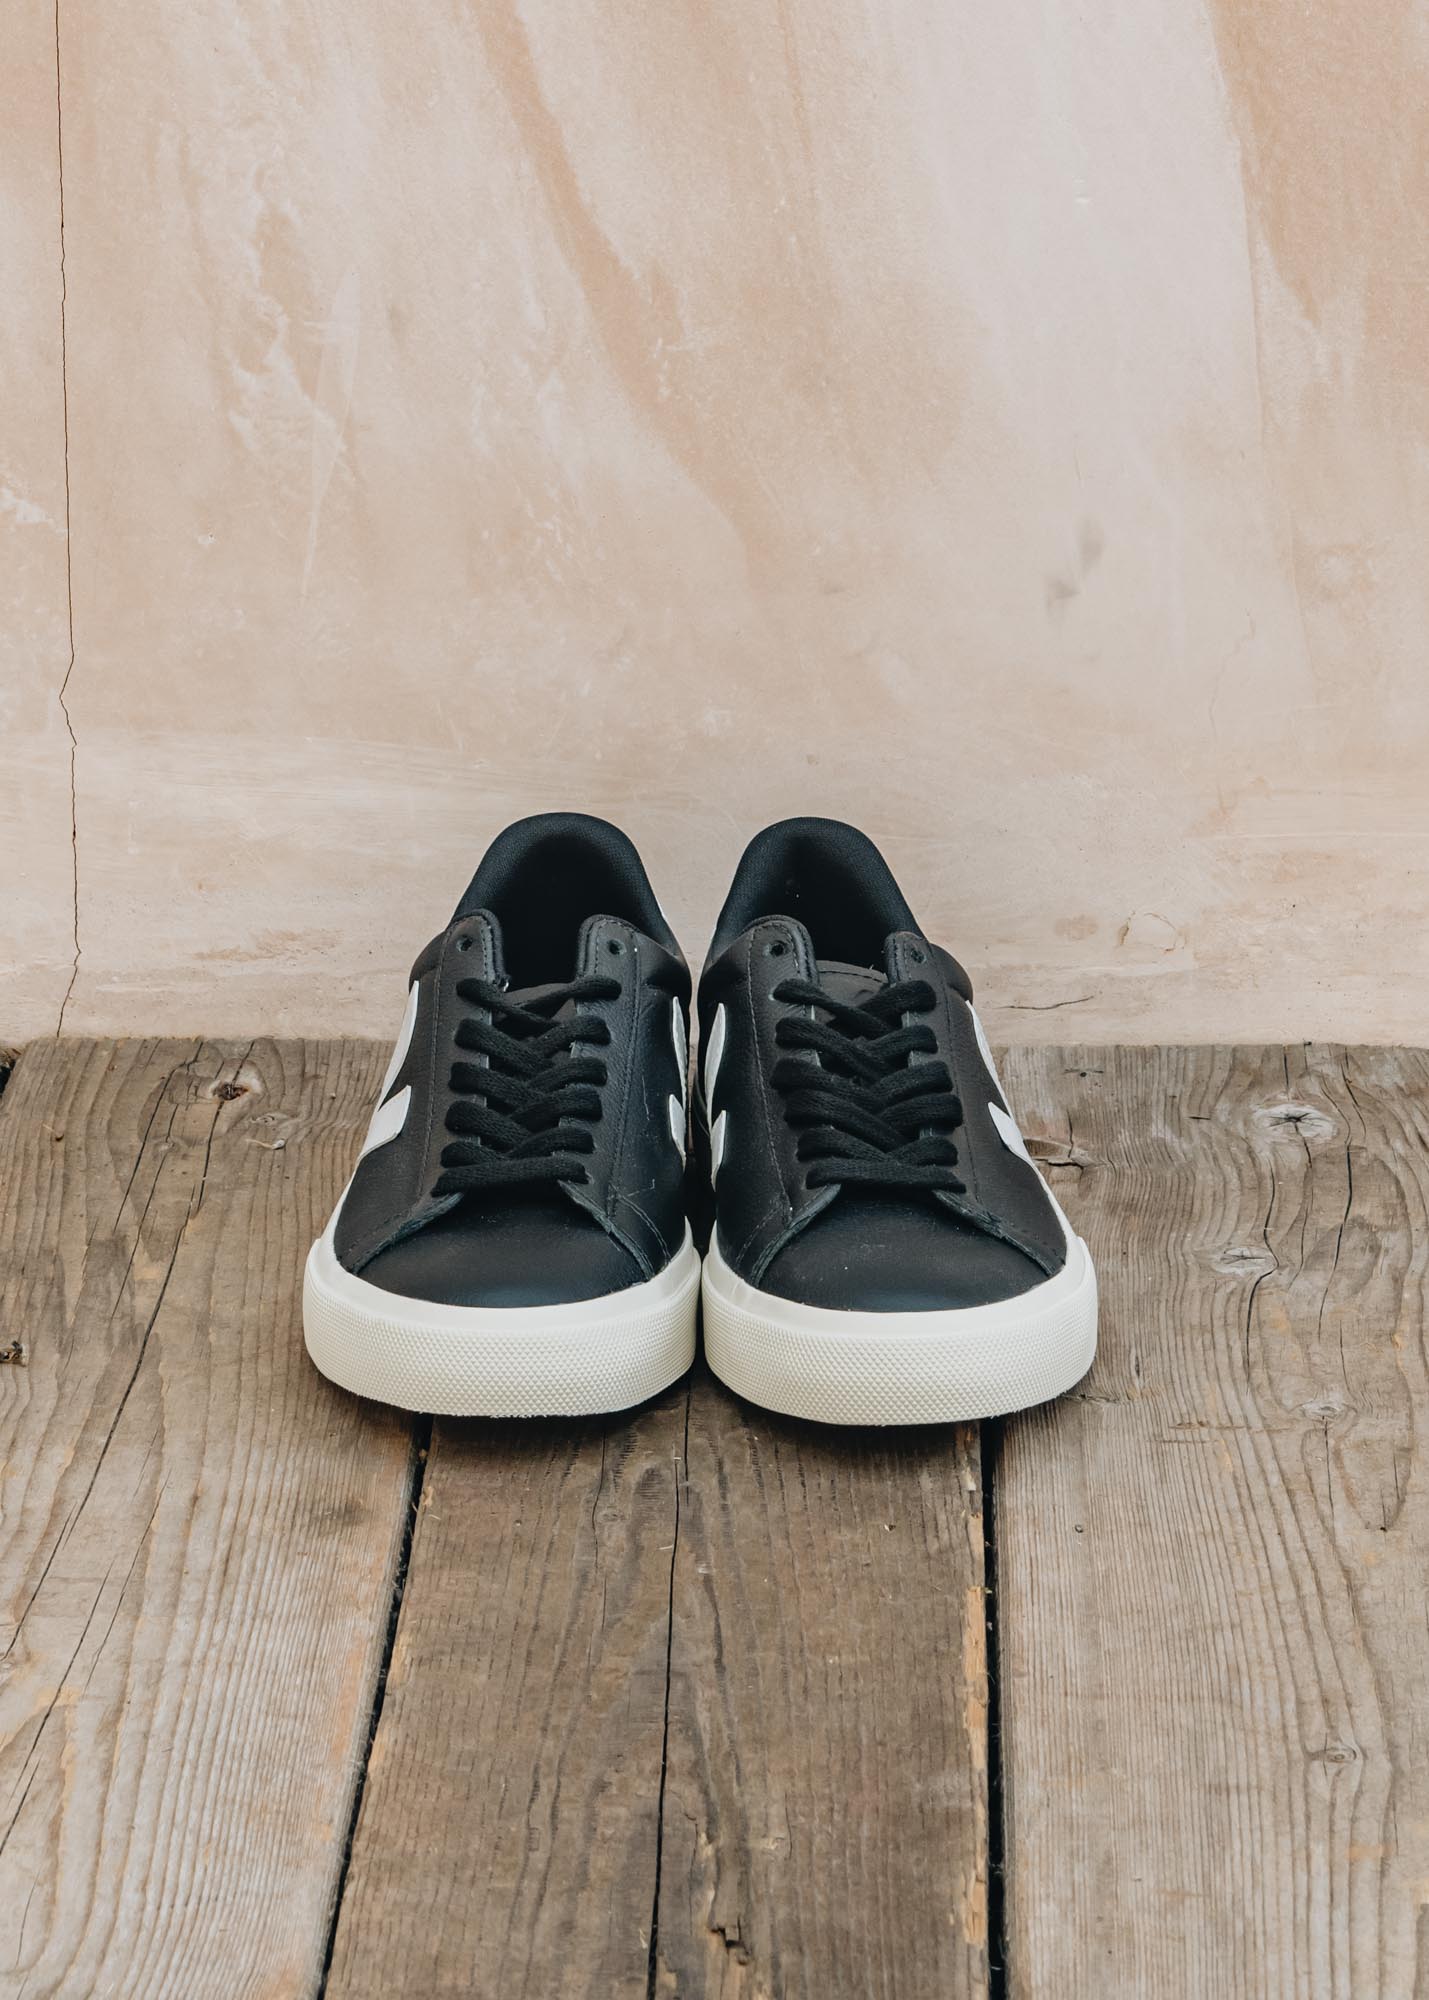 Veja Women's Campo Leather Trainers in White and Black